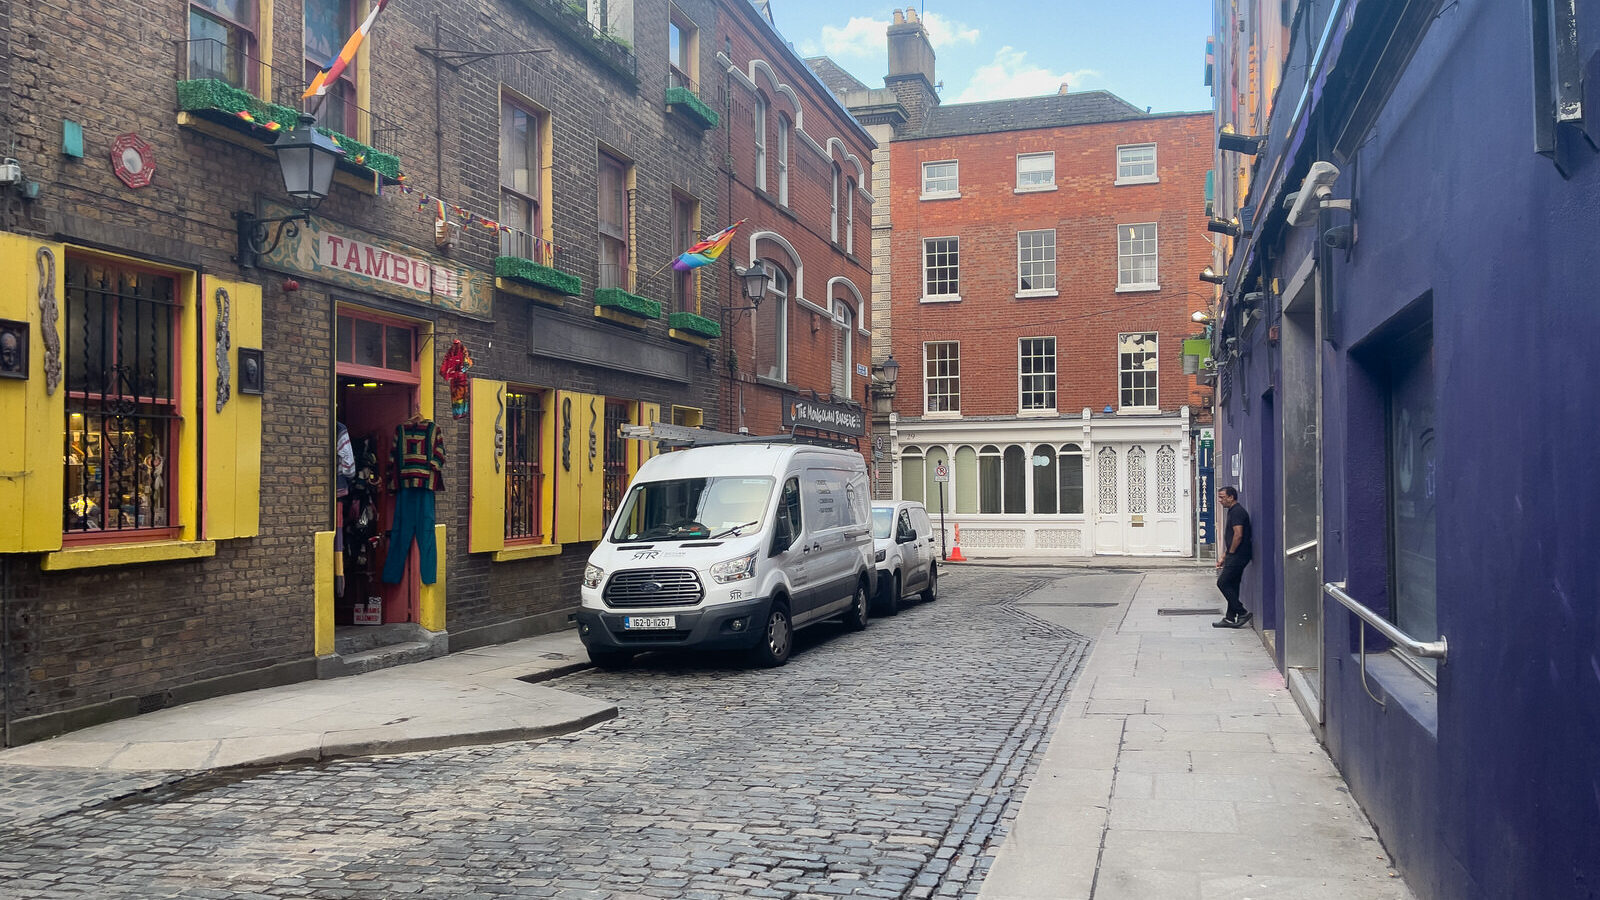 VISITING DUBLIN FOR ST PATRICK'S WEEKEND [IS TEMPLE BAR AS GOOD AS MANY CLAIM IT TO BE?]-229510-1